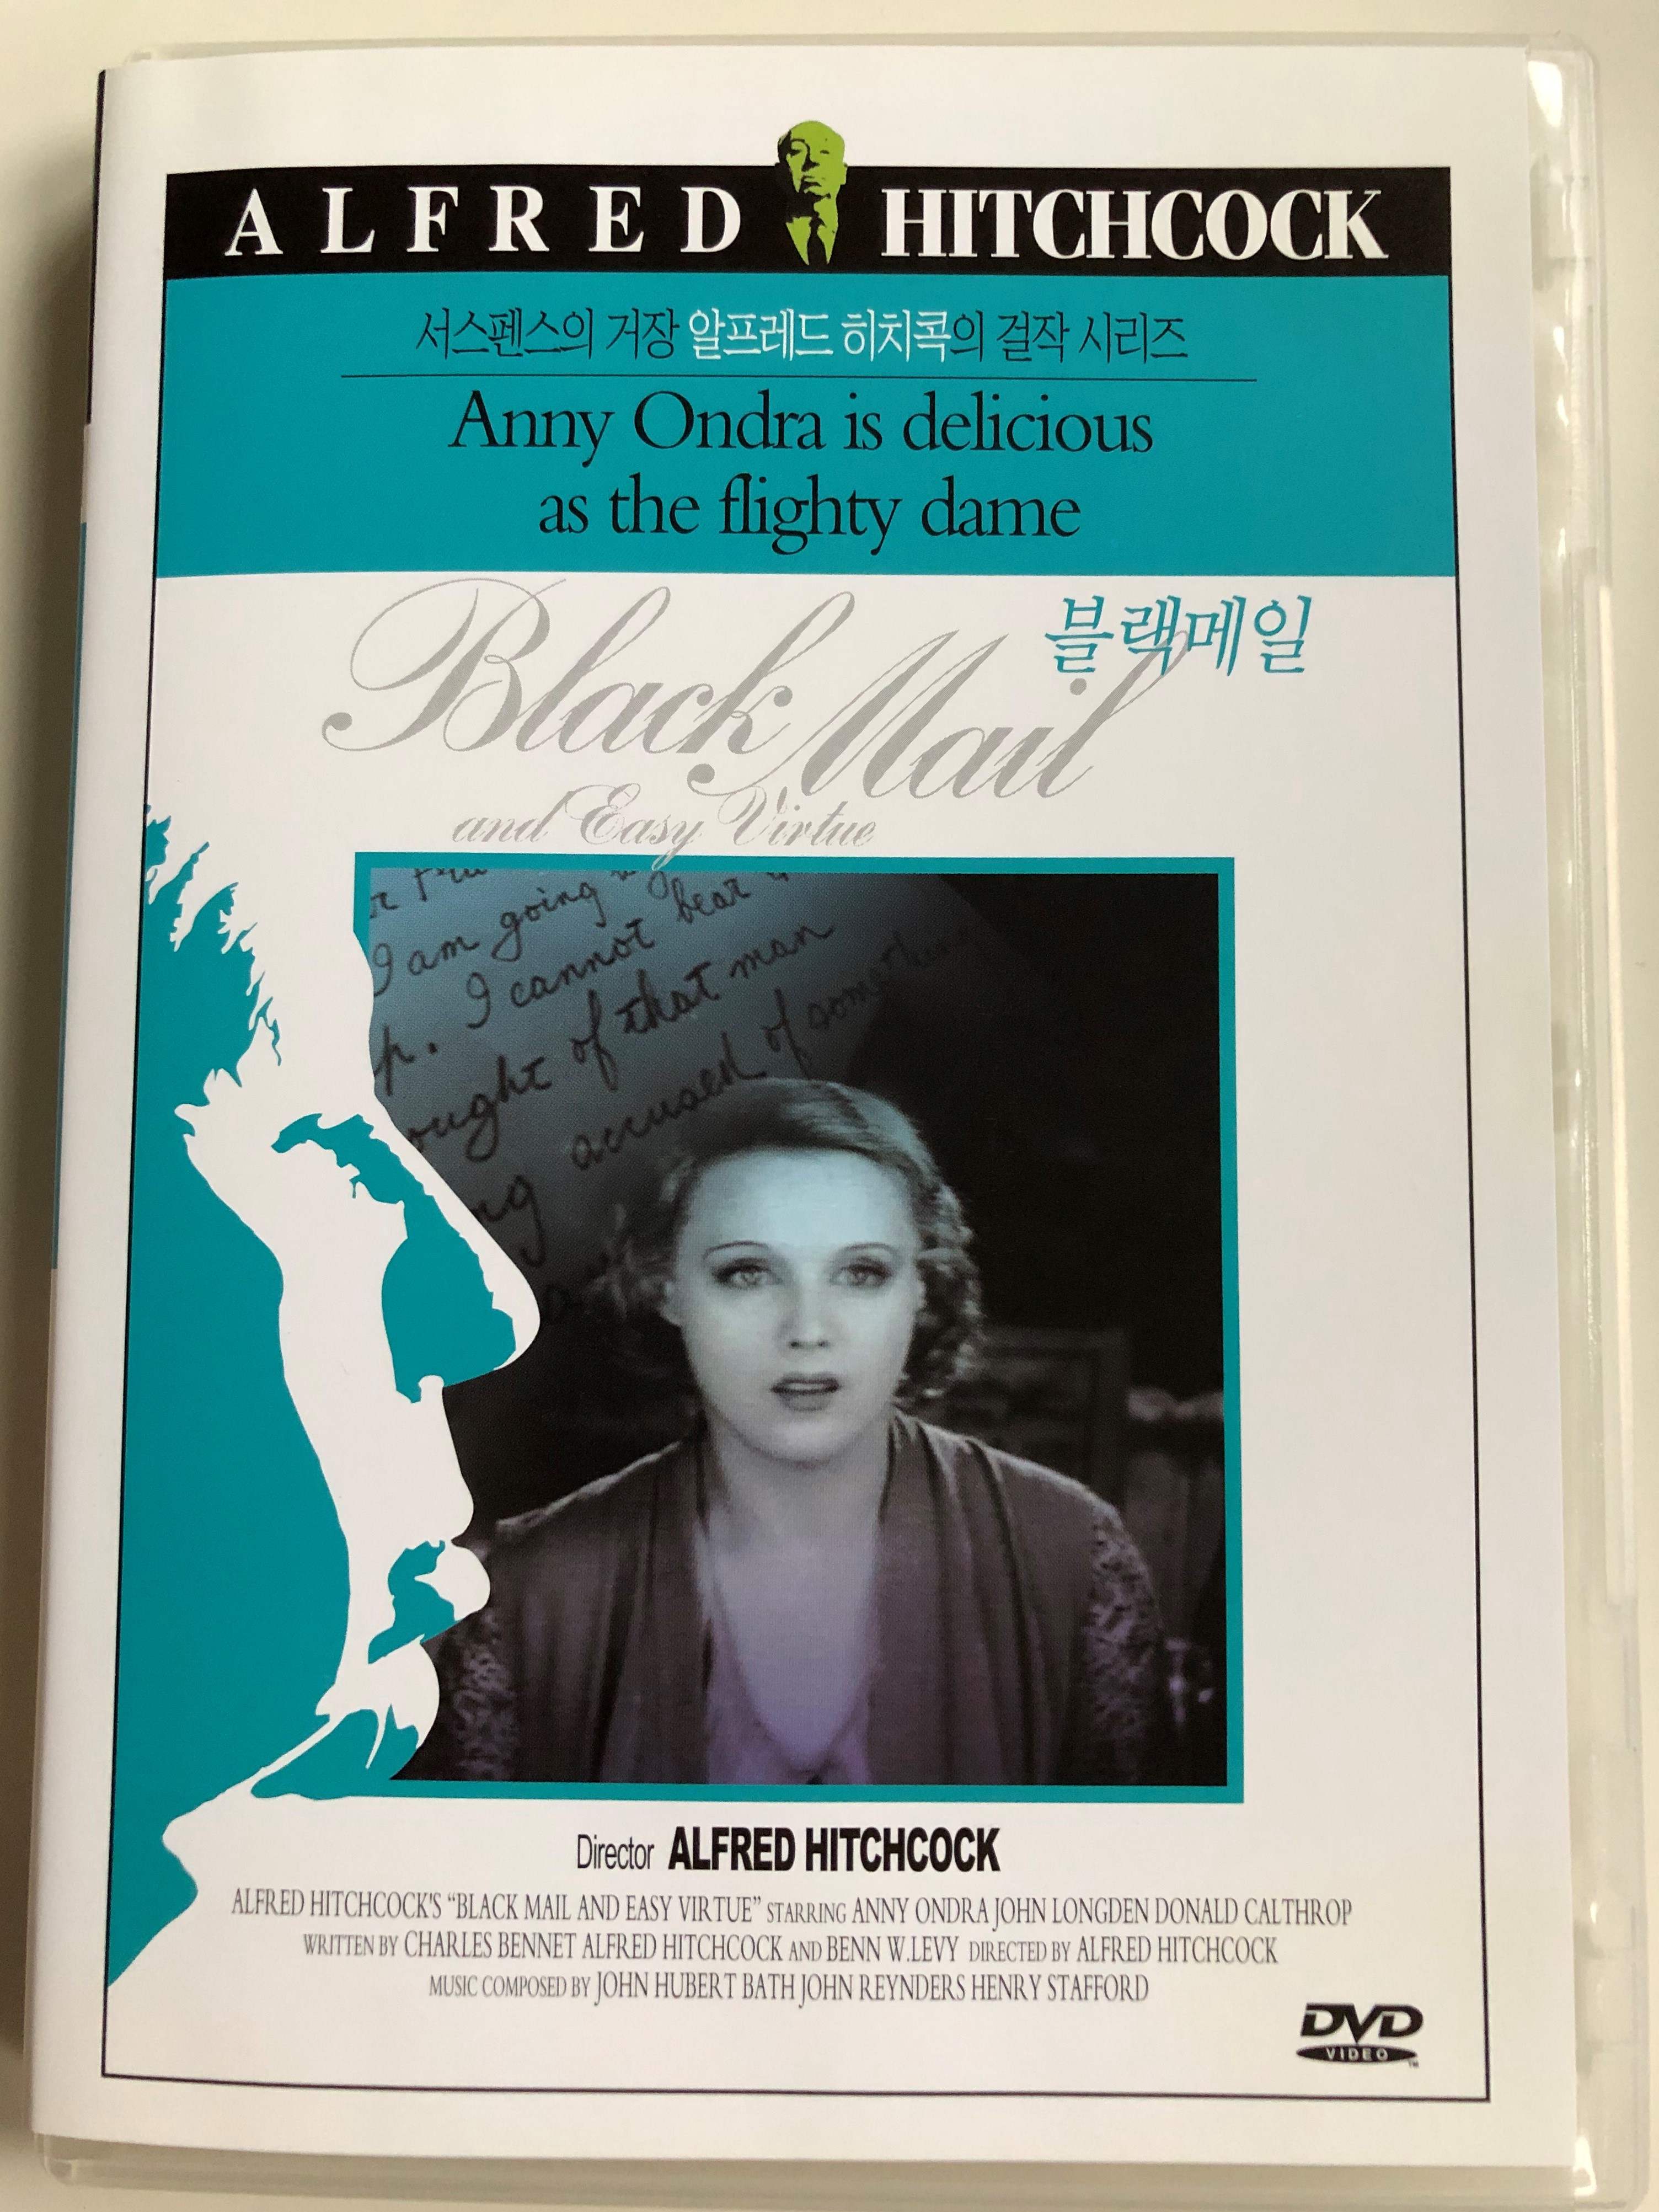 Black mail and Easy Virtue DVD 1929 / Directed by Alfred Hitchcock /  Starring: Anny Ondra, John Longden, Cyril Ritchard - bibleinmylanguage